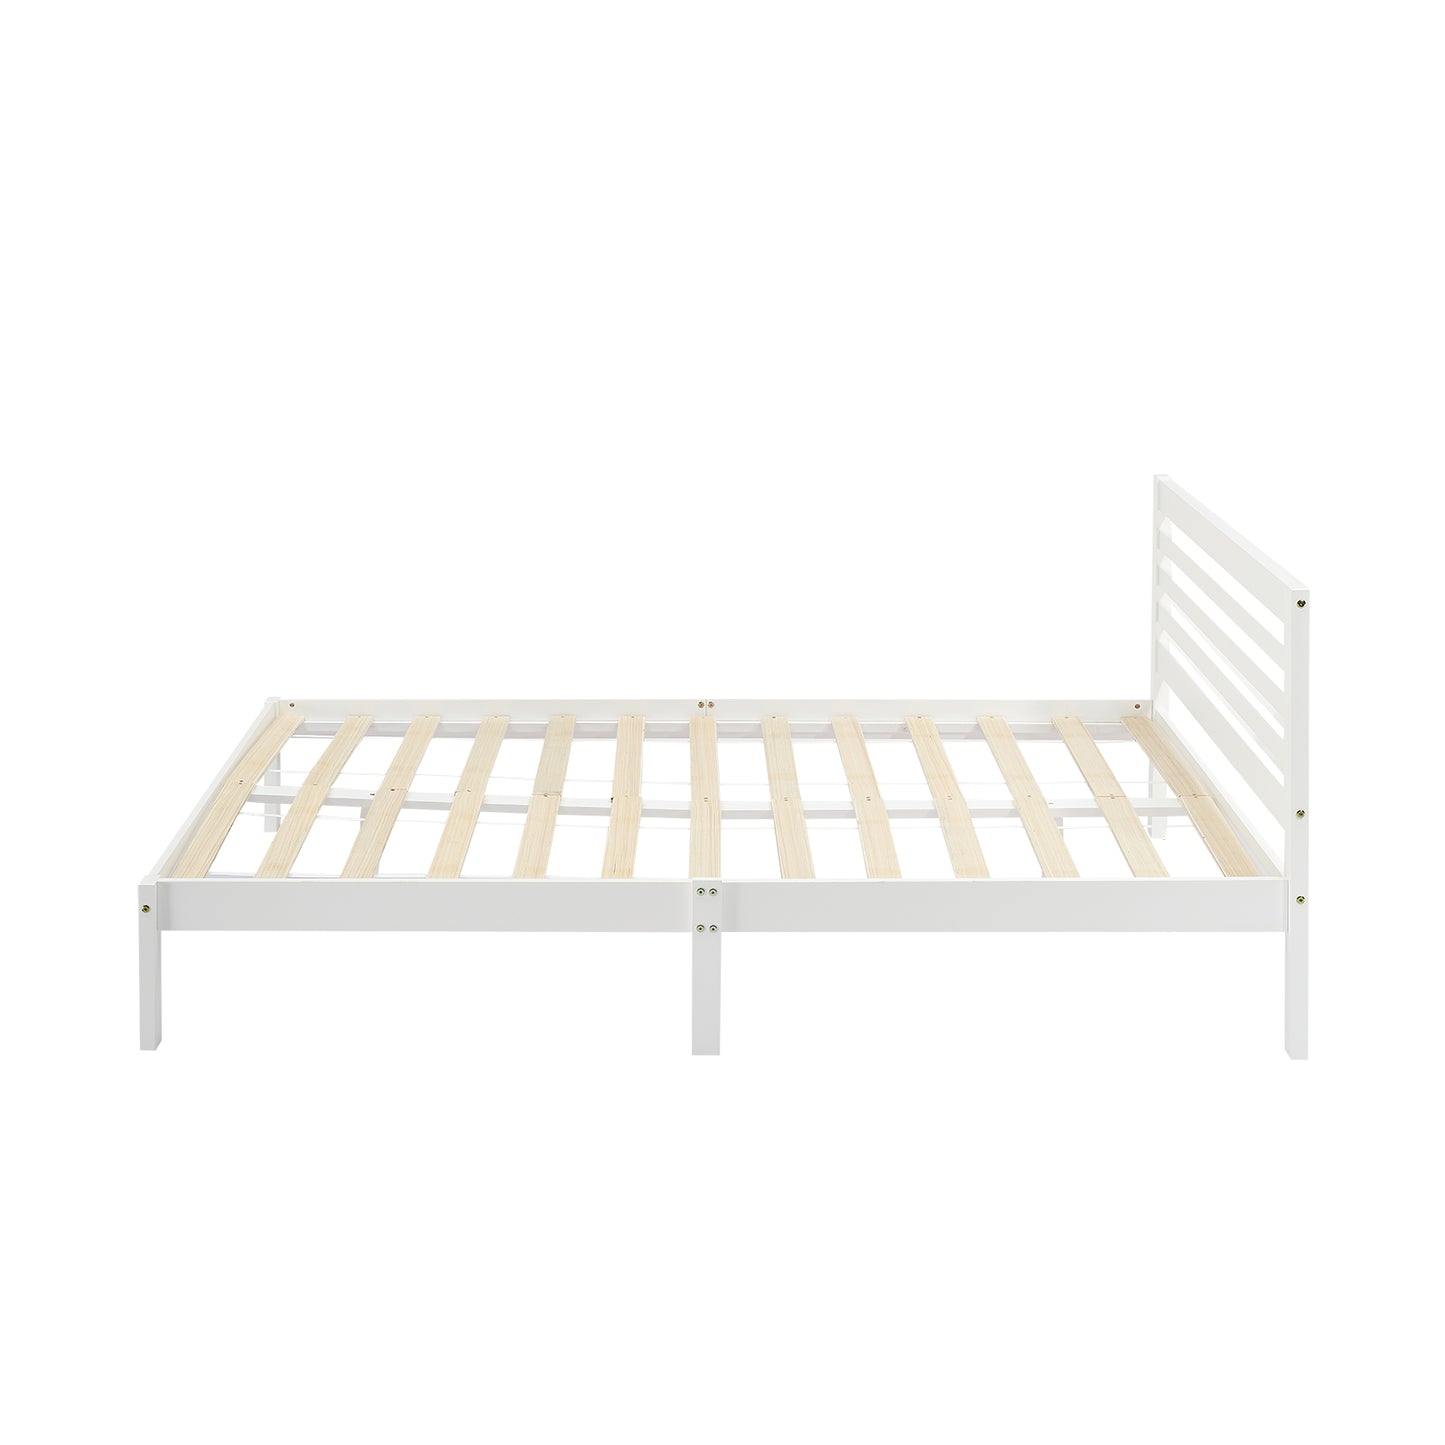 BEAN Wooden Single/Double Bed Frame